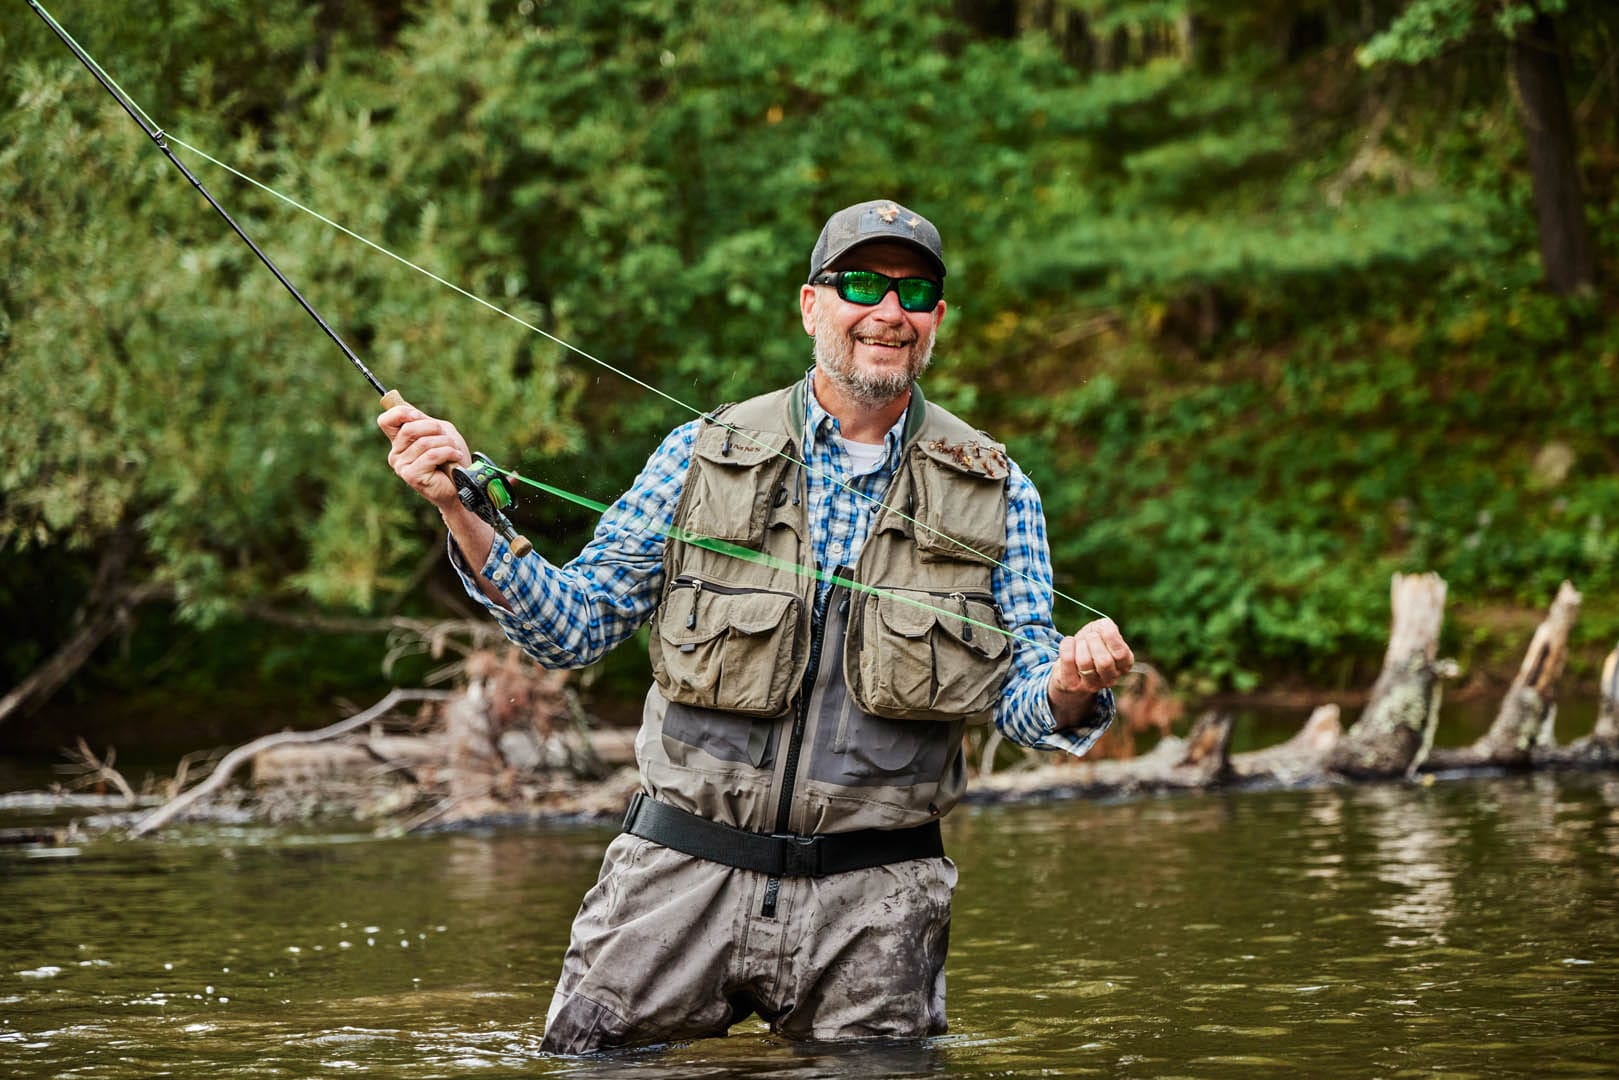 A smiling man with green-tinted sunglasses is fly-fishing in a deep, dark river. He is wearing waders that allow him to be in the water without getting wet. The water is at his groin level. The trees along the river are bright green and there are quite a few tree trunks fallen in the water.